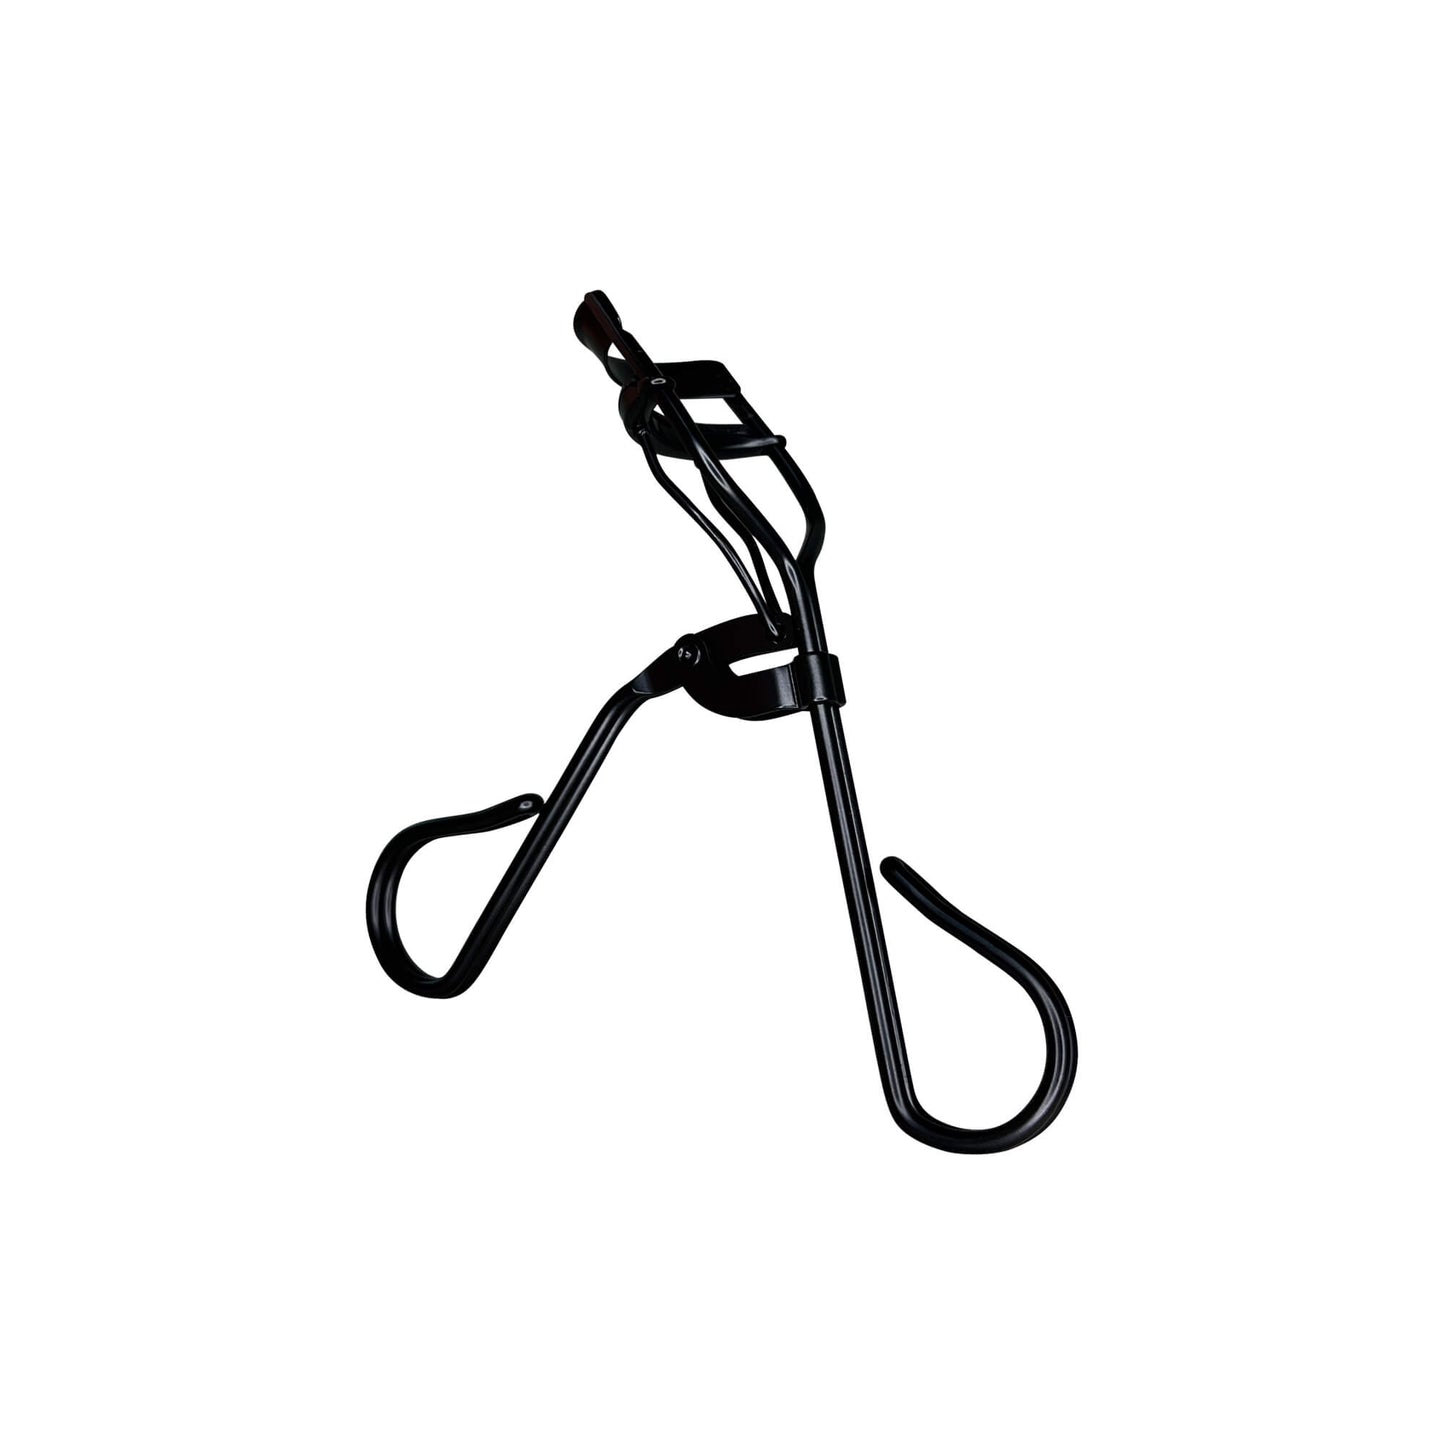 Experience the perfect, glamorous curl with the Cruisin Organics Pro Eyelash Curler. Designed with a wide mouth to fit all eye shapes, this curler prevents pinching and crimping while adding volume to your lashes. The included silicone pad ensures smooth curls and crimp-free lashes with every use.